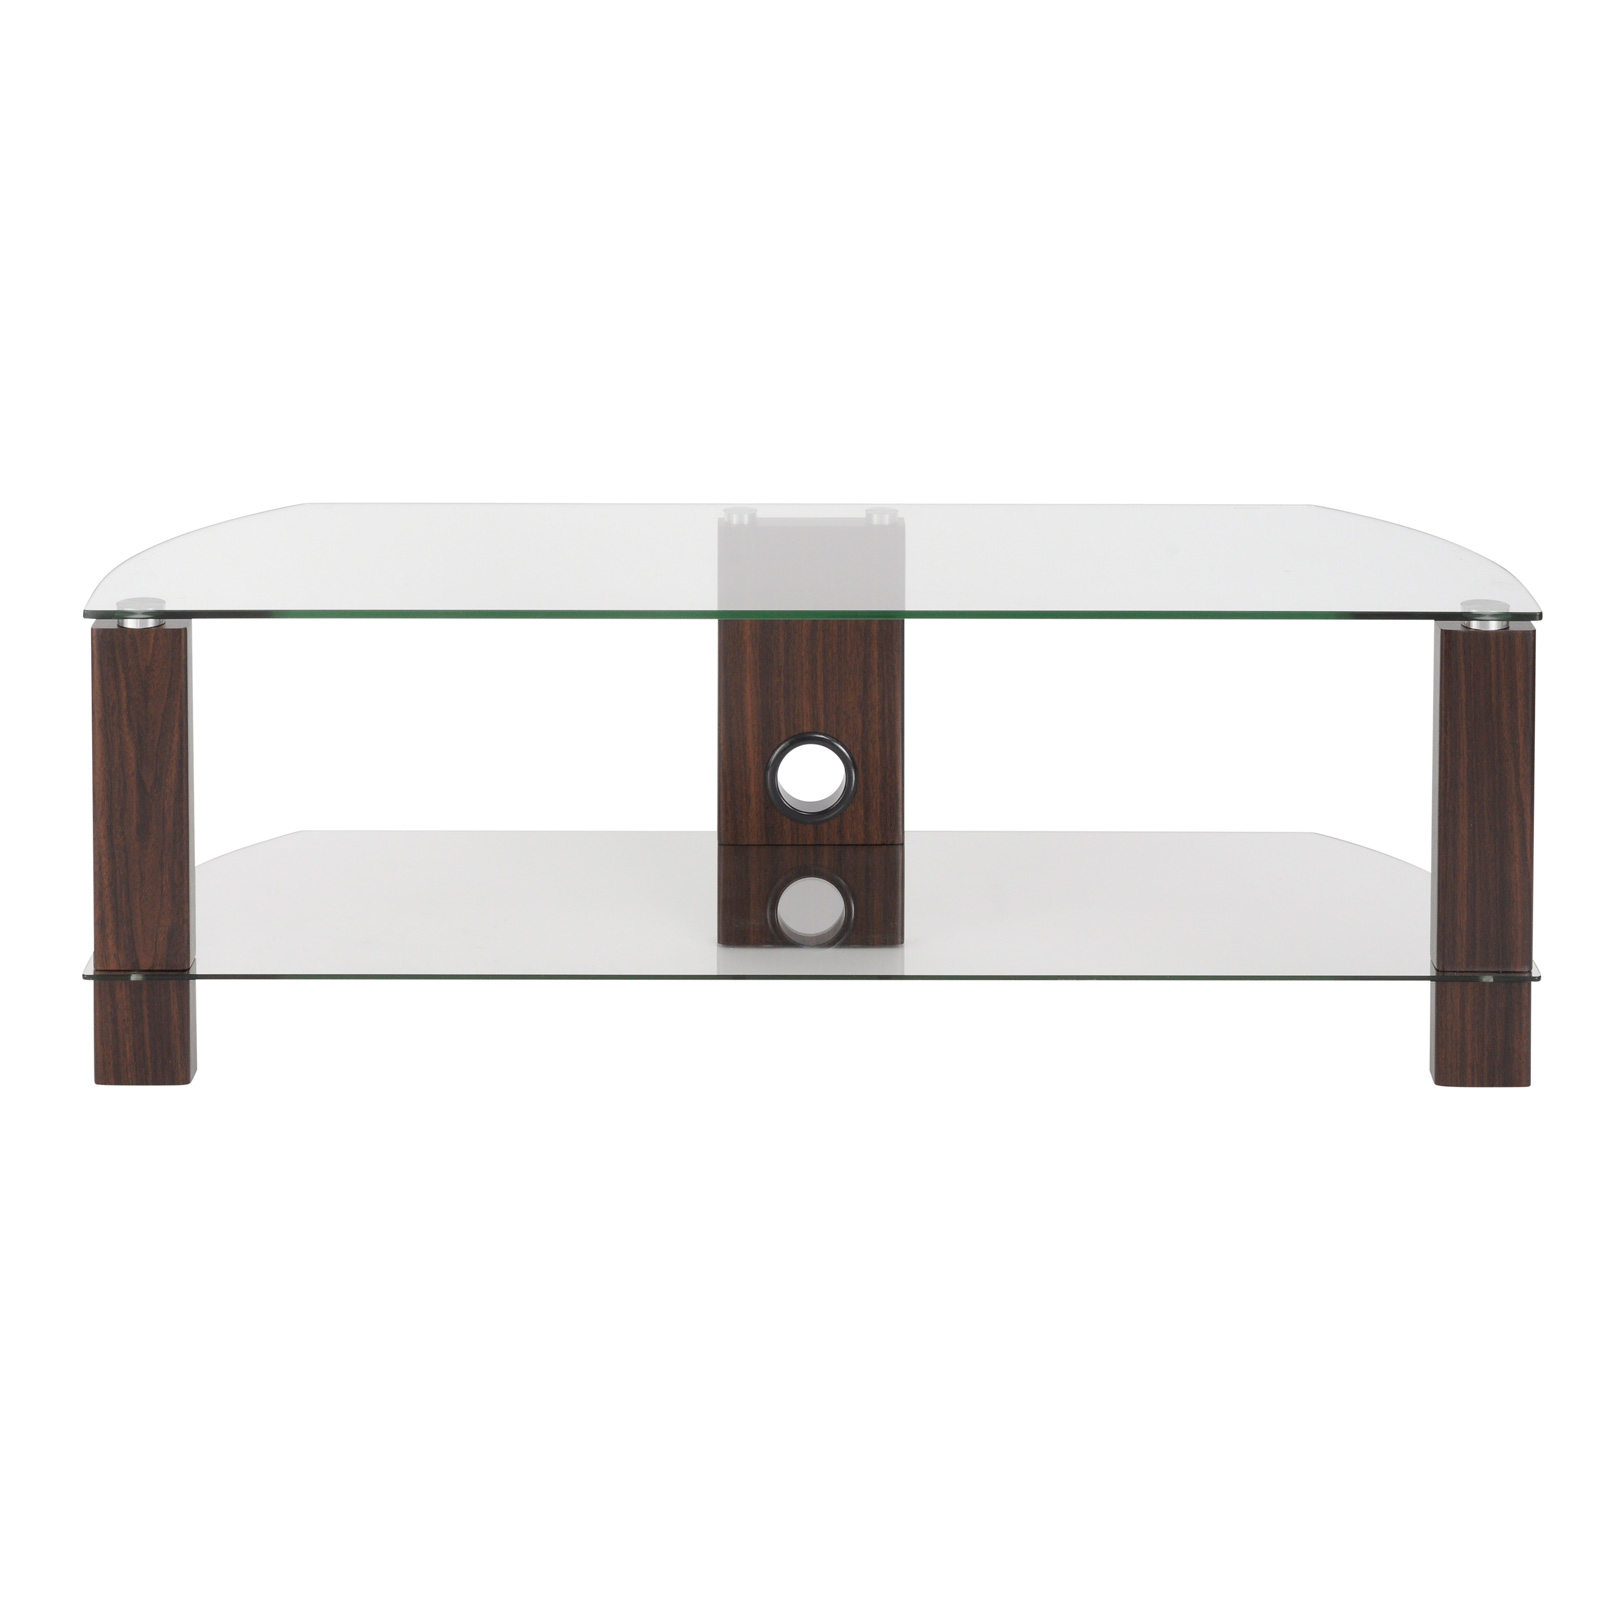 Photos - Mount/Stand TTAP L630 12002WC Vision 1200mm TV Stand in Walnut with Clear Glass L630-1 